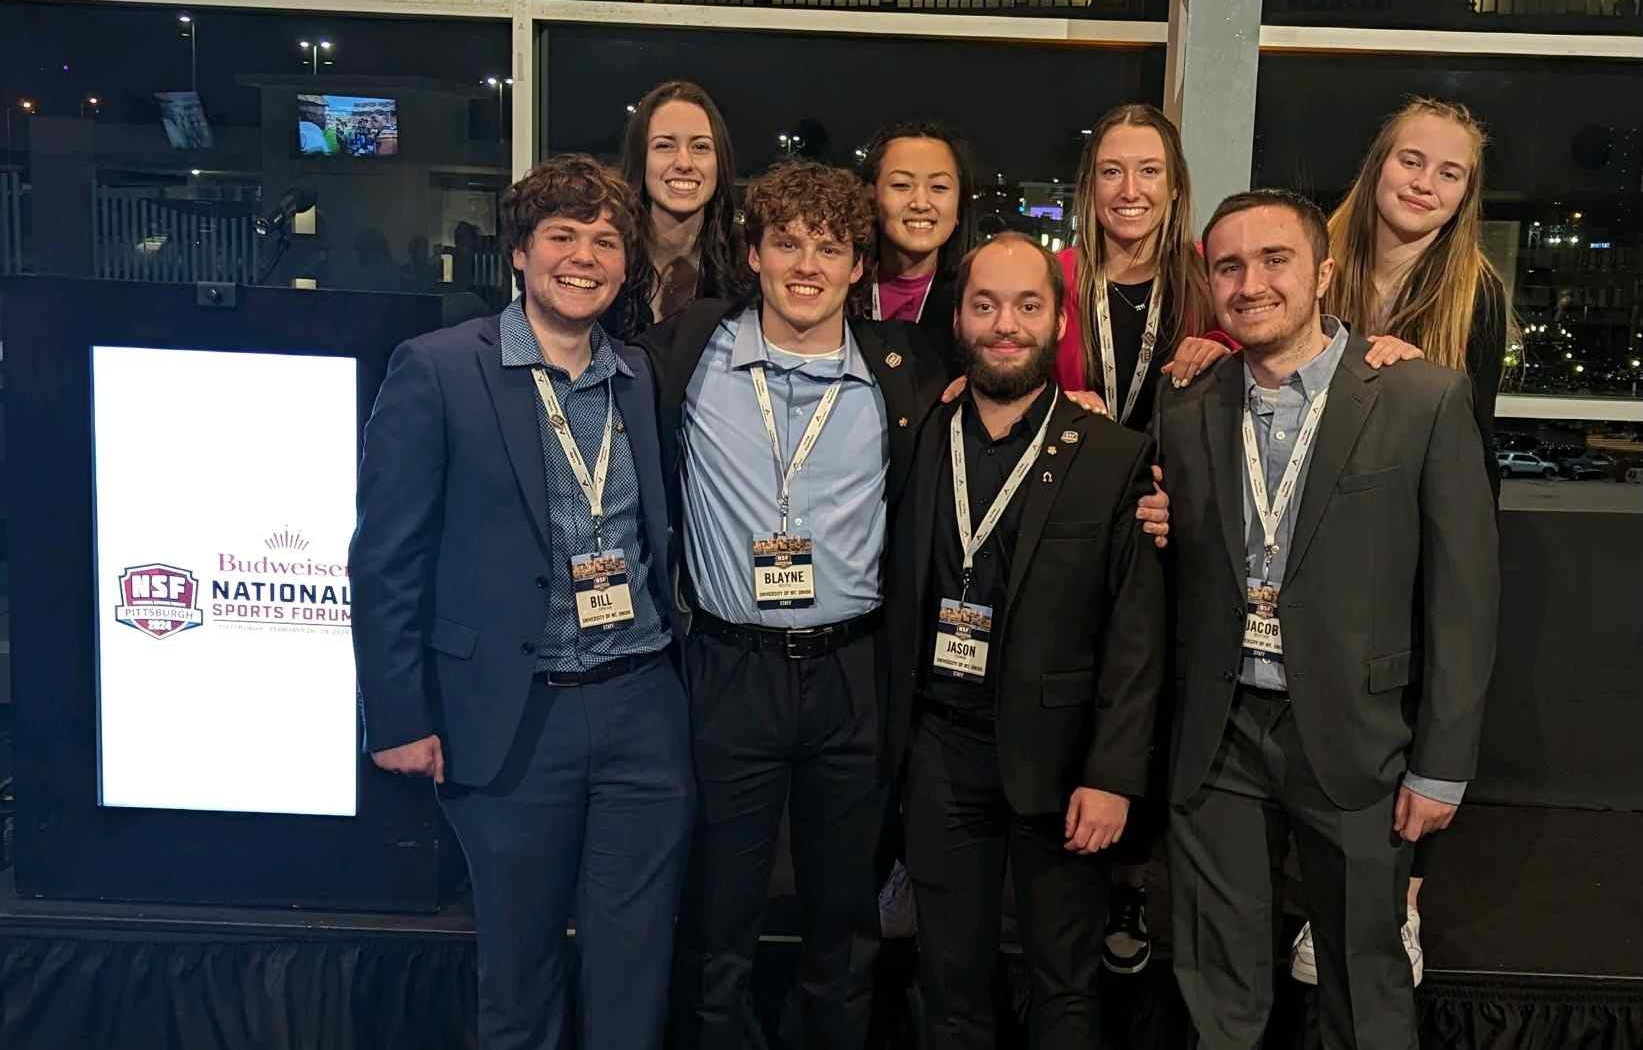 mount union students standing at national sports forum